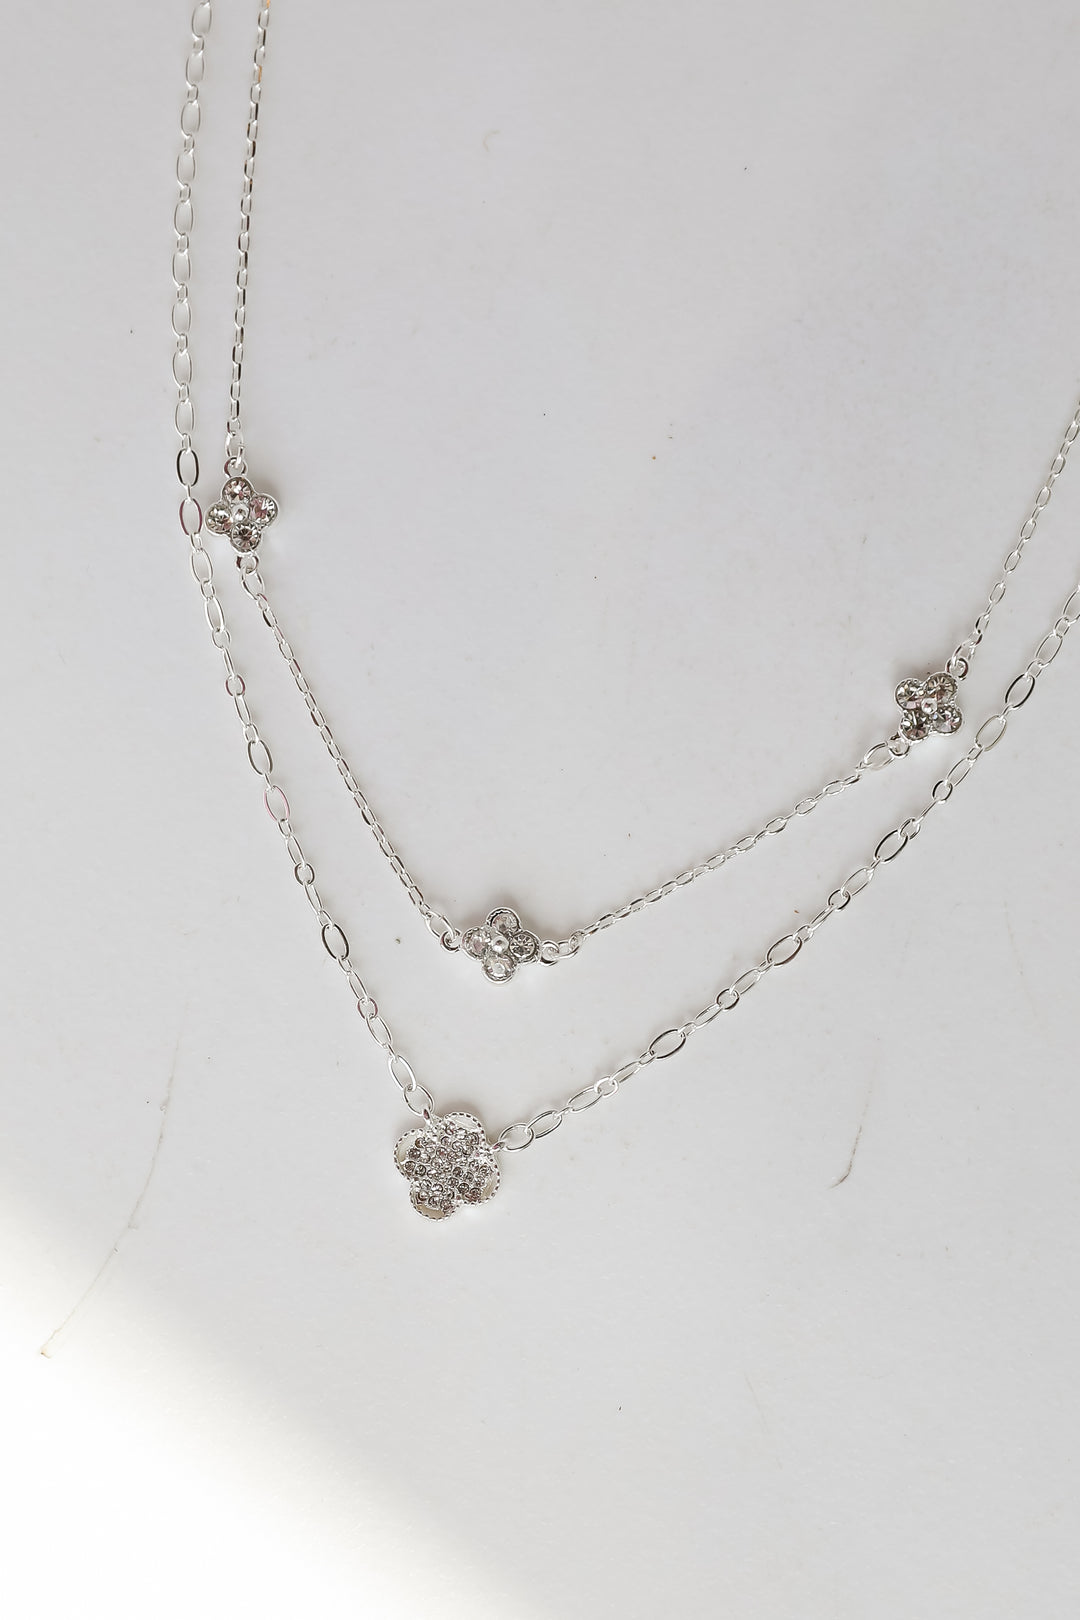 Paige Layered Chain Necklace silver dainty jewelry